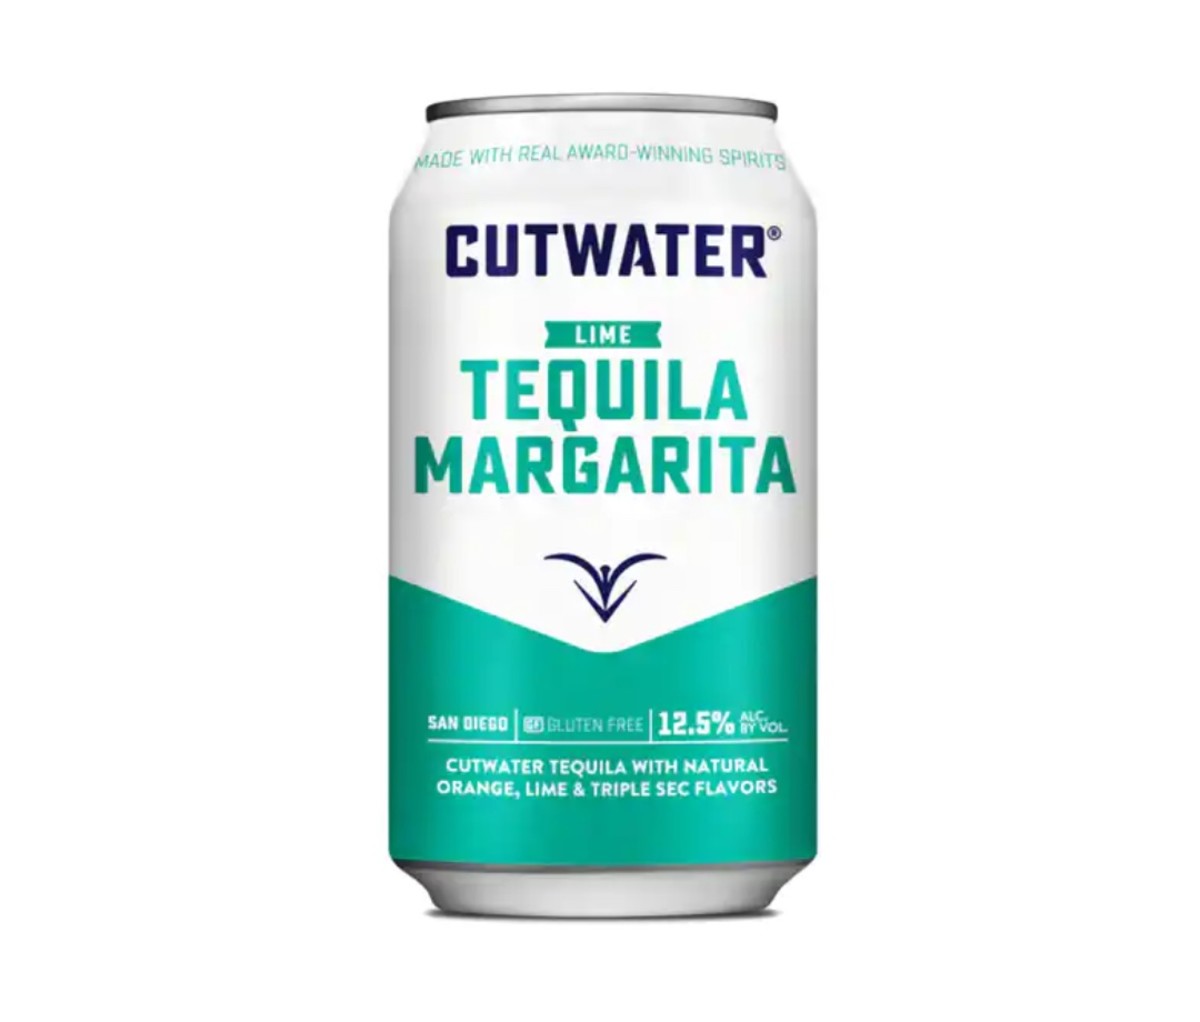 Cutwater Tequila Margarita is one of the summer's best canned cocktails.